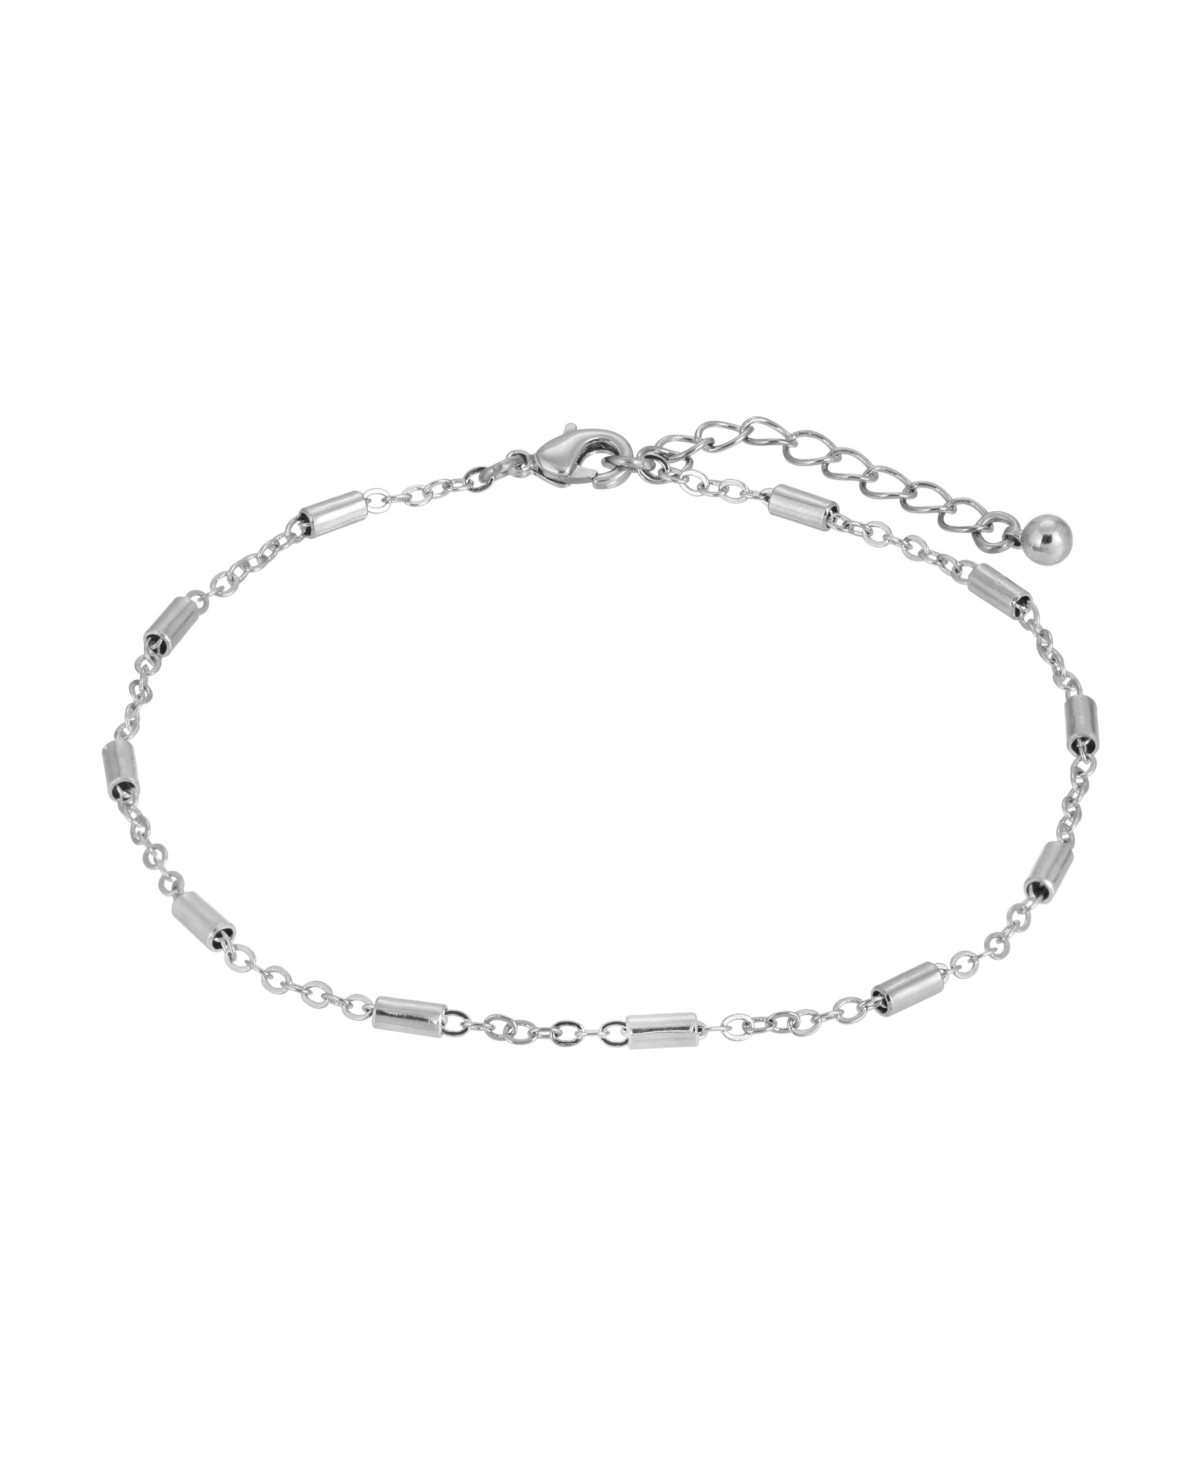 Women's Silver-Tone Chain Anklet - Gray